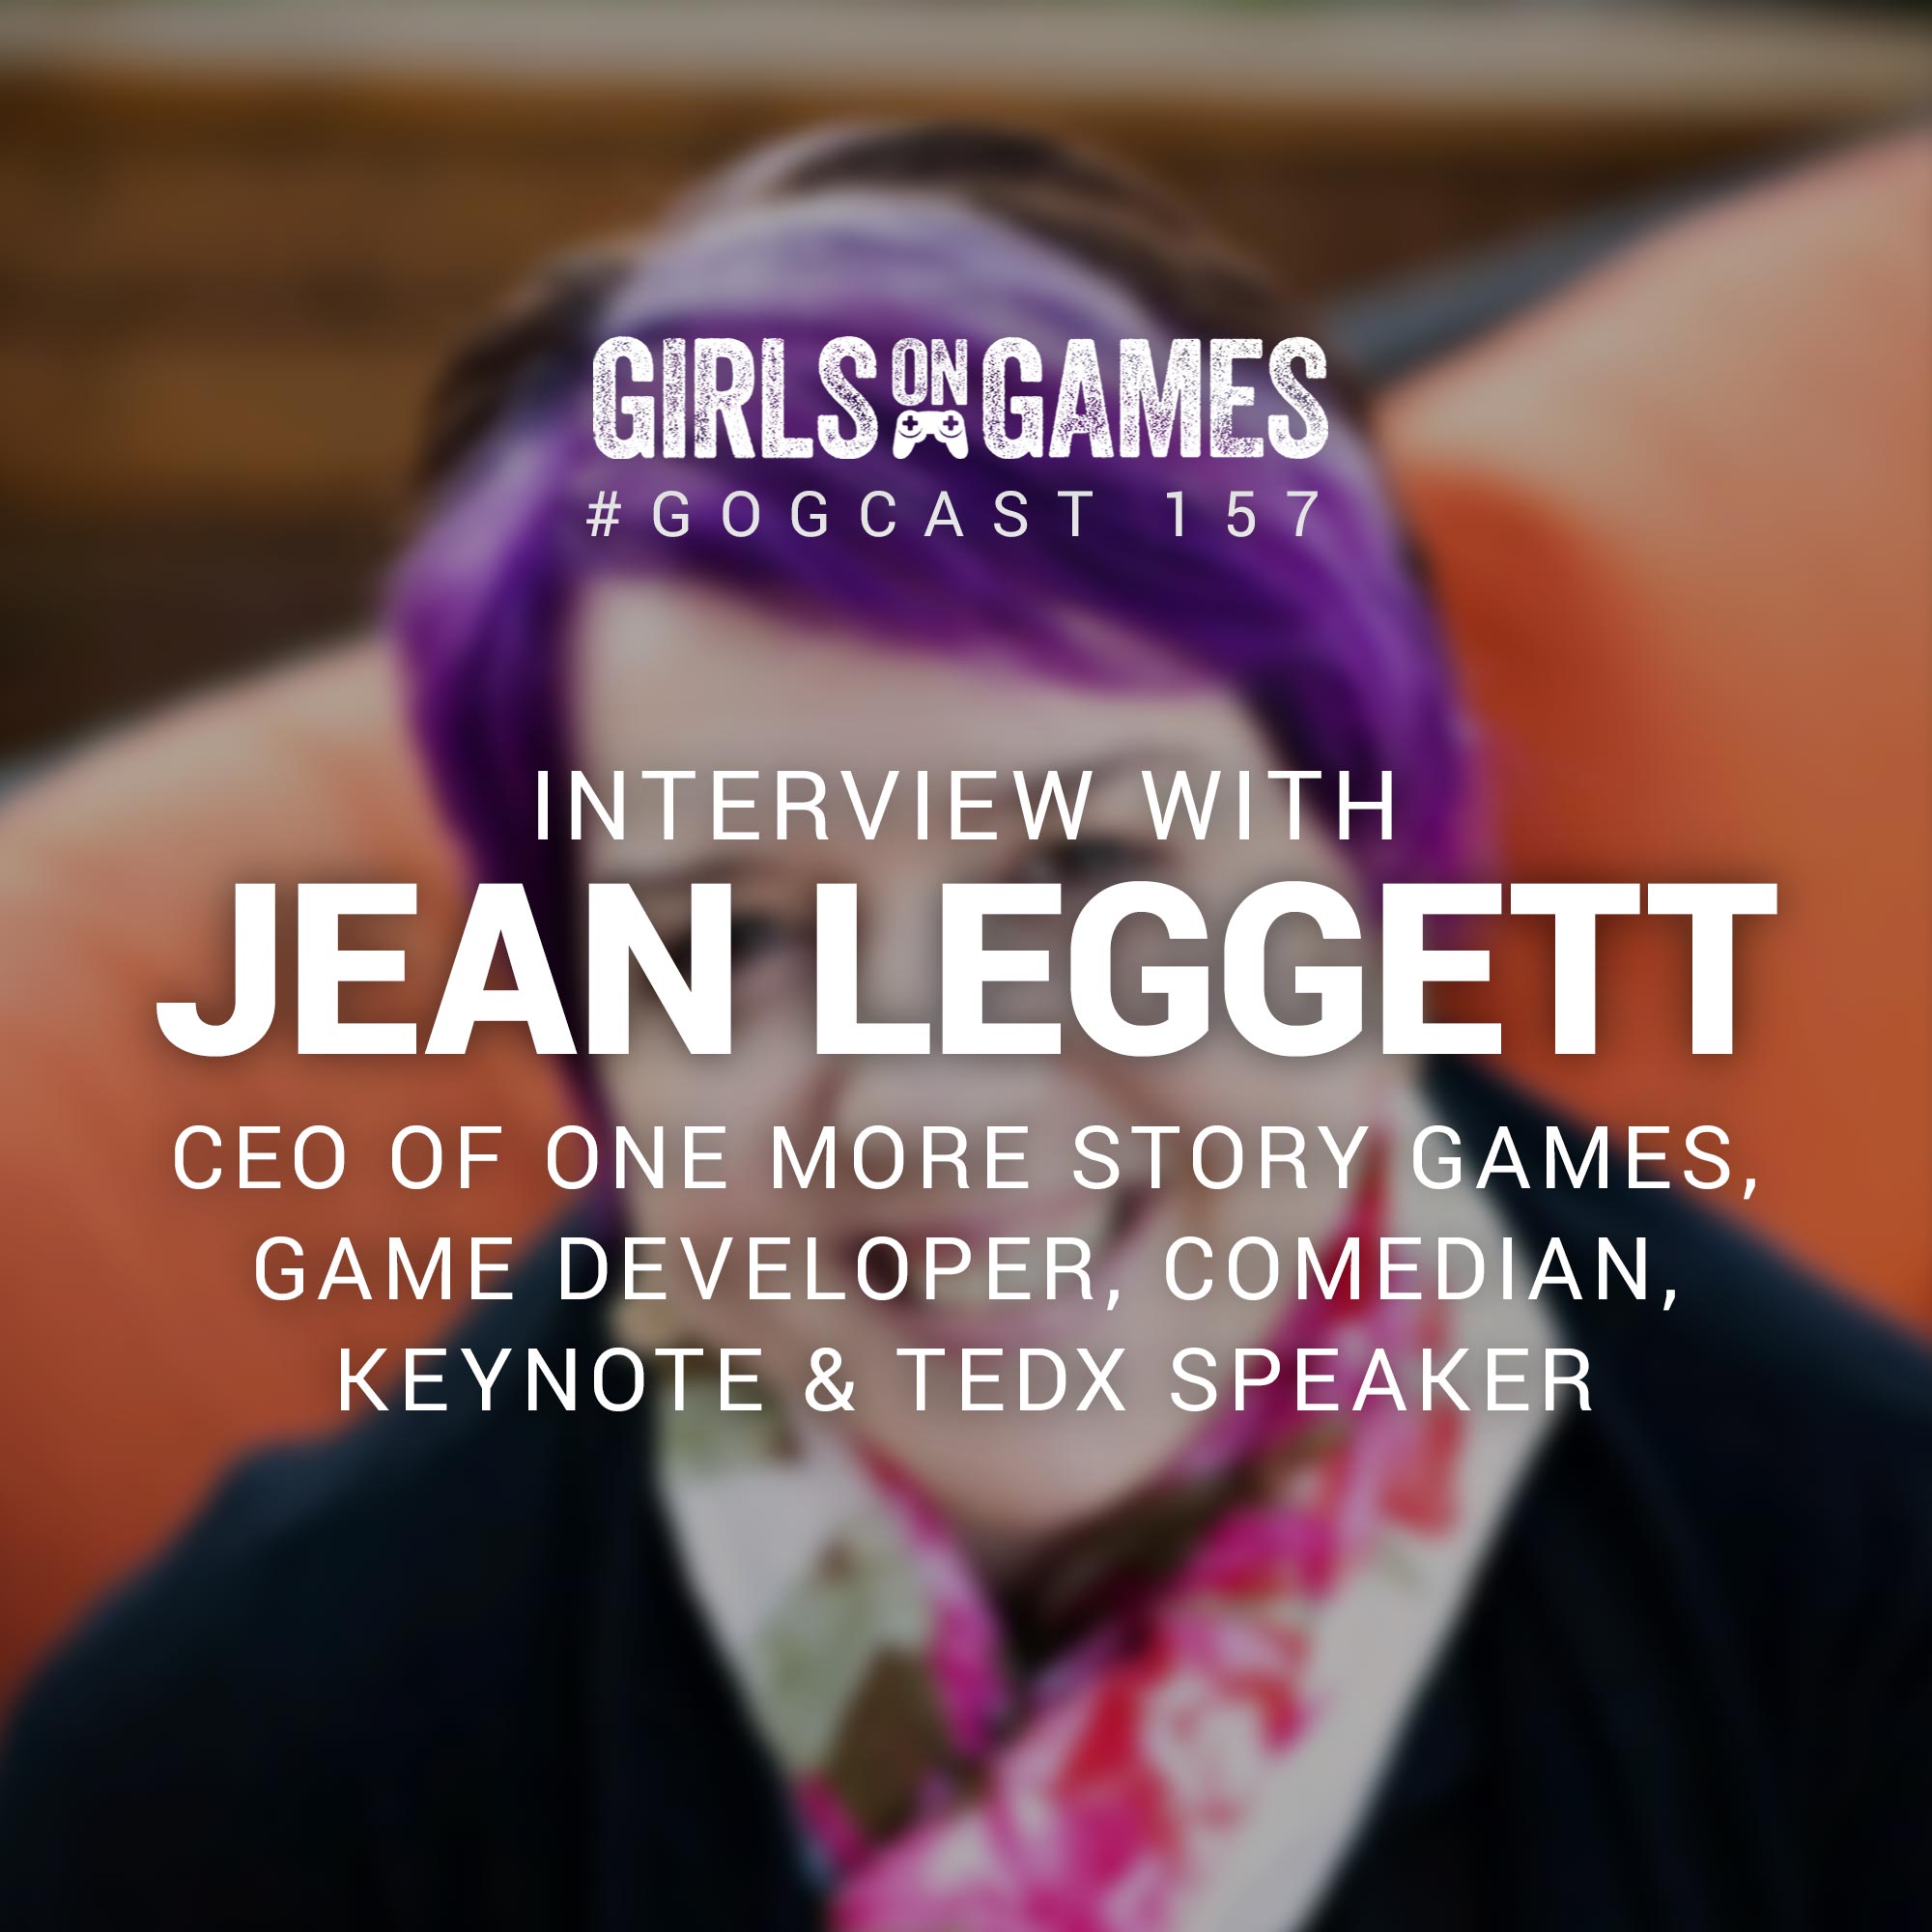 GoGCast 157: Interview with Jean Leggett of One More Story Games